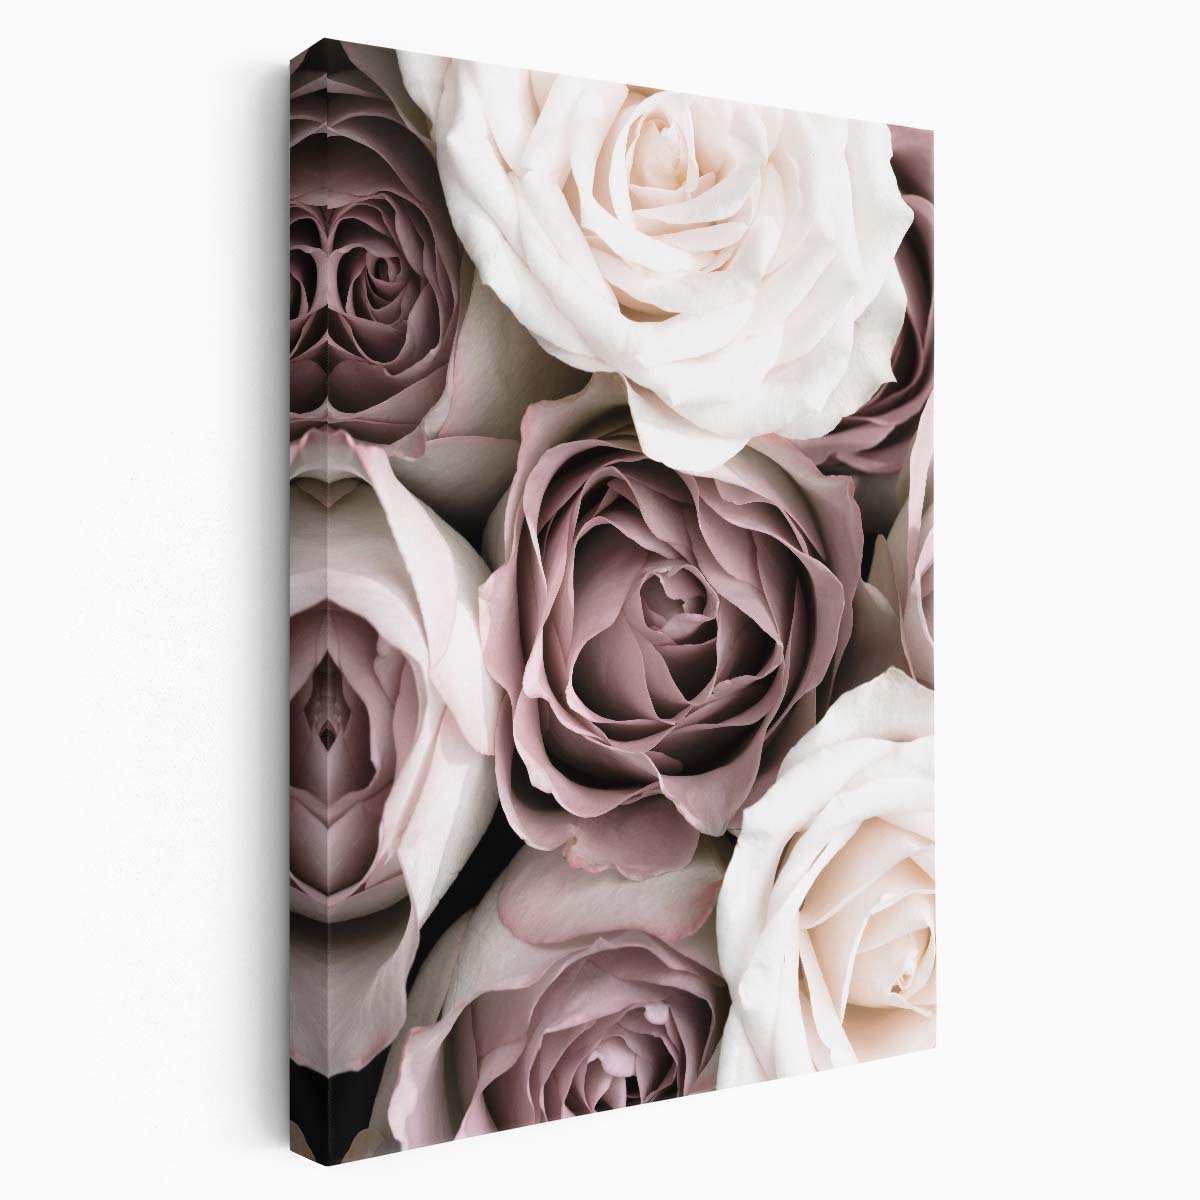 Botanical Still Life Photography Blossoming Pink Rose Flowers by Luxuriance Designs, made in USA